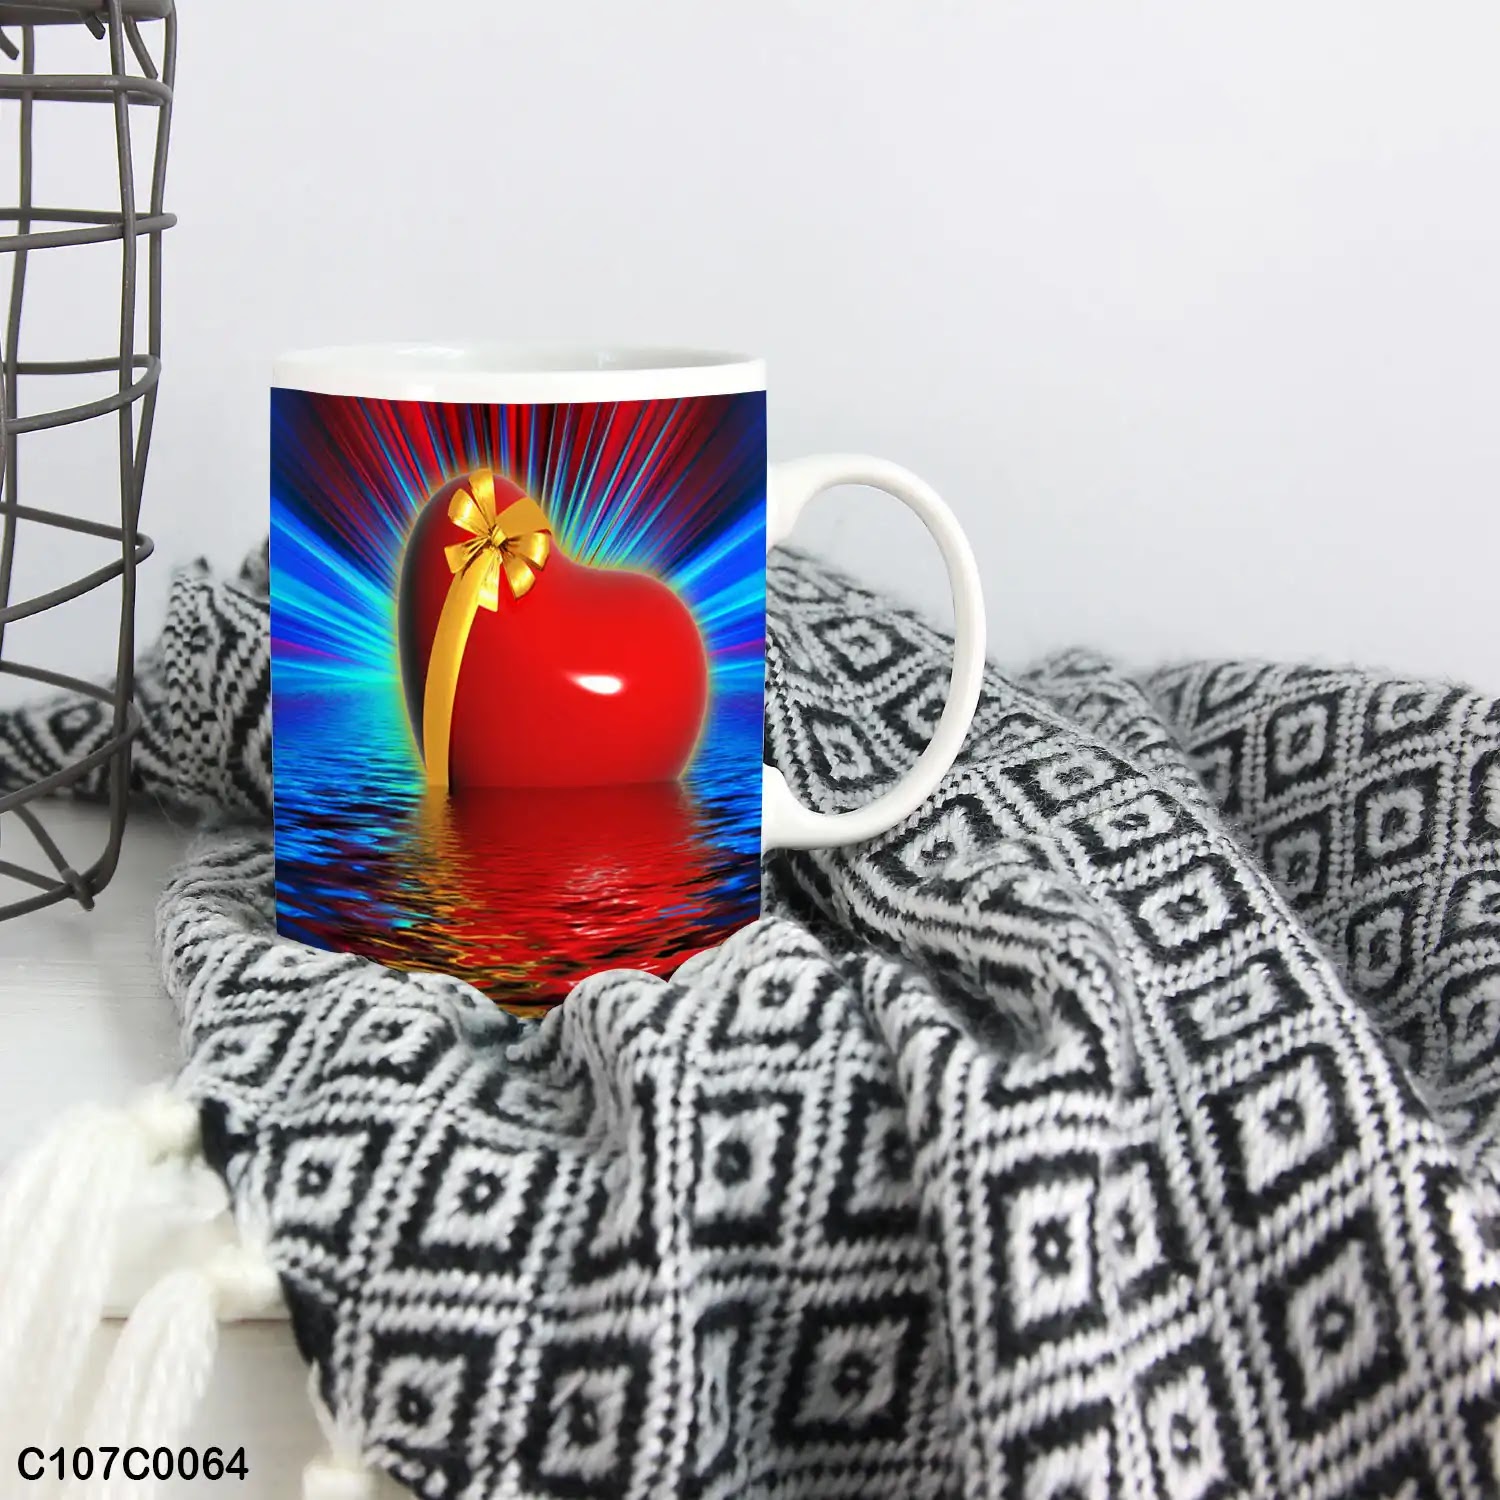 A mug (cup) printed with an image of a big red heart